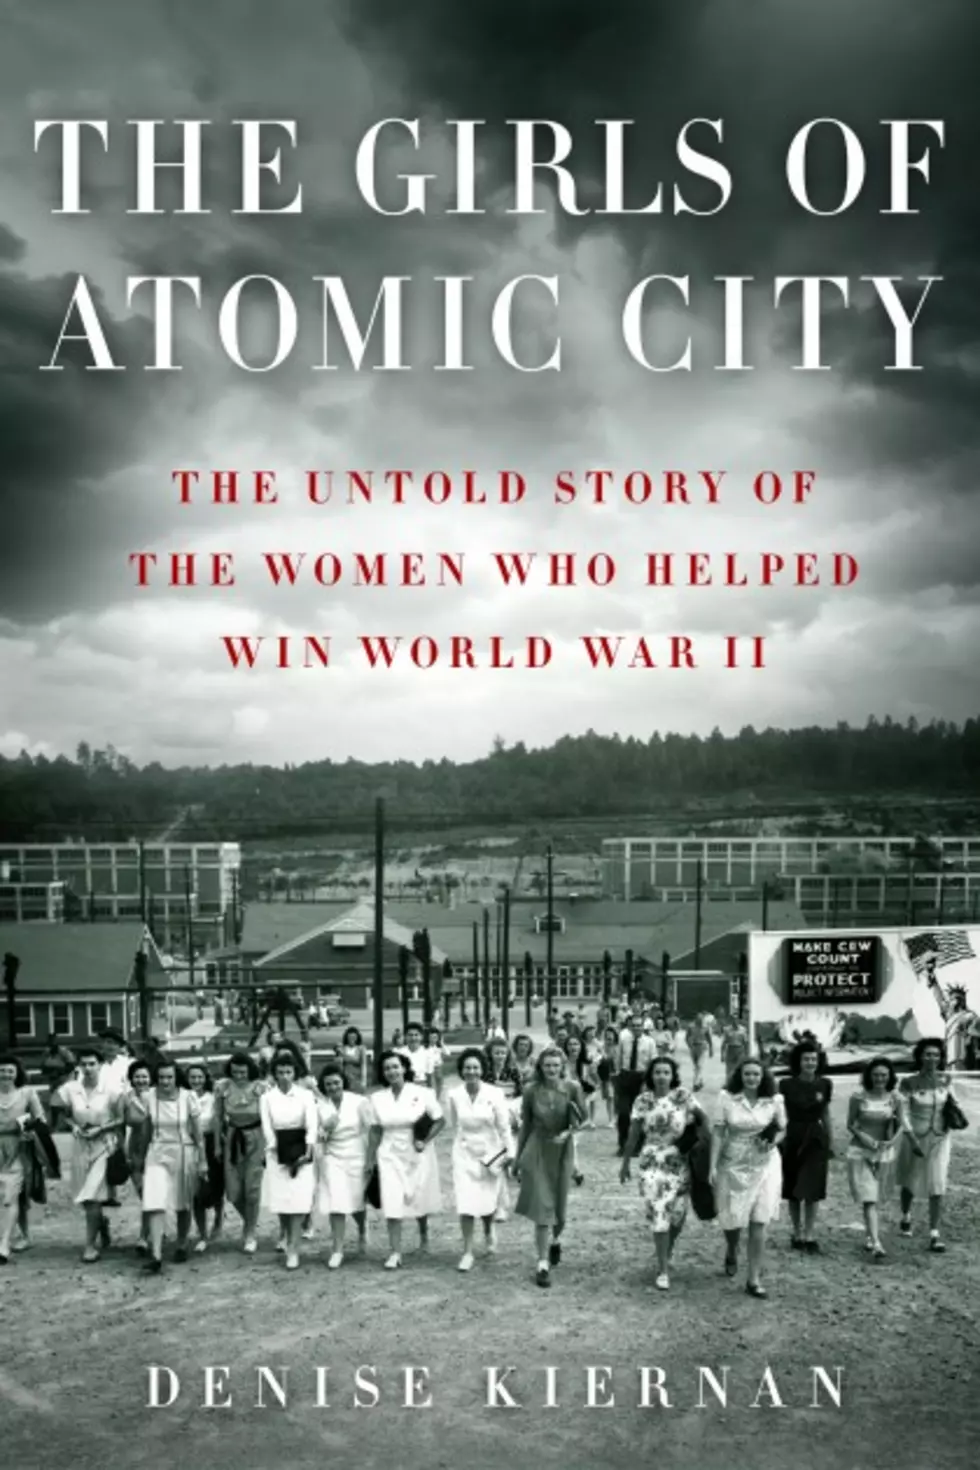 A Big Chuck Book Review: &#8220;The Girls of Atomic City&#8221;